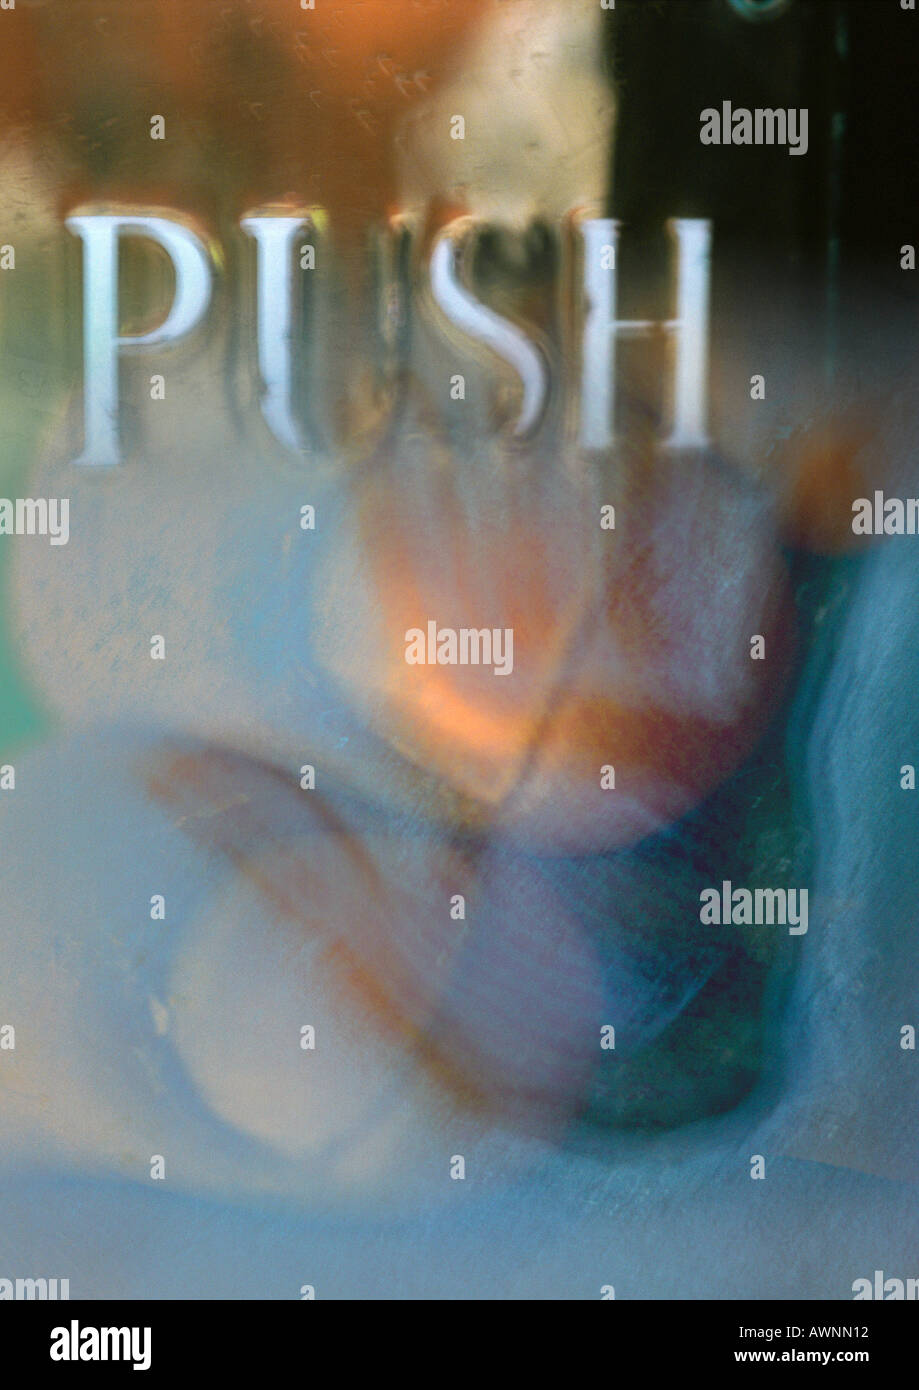 Push typography overlaying blurry button, montage Stock Photo